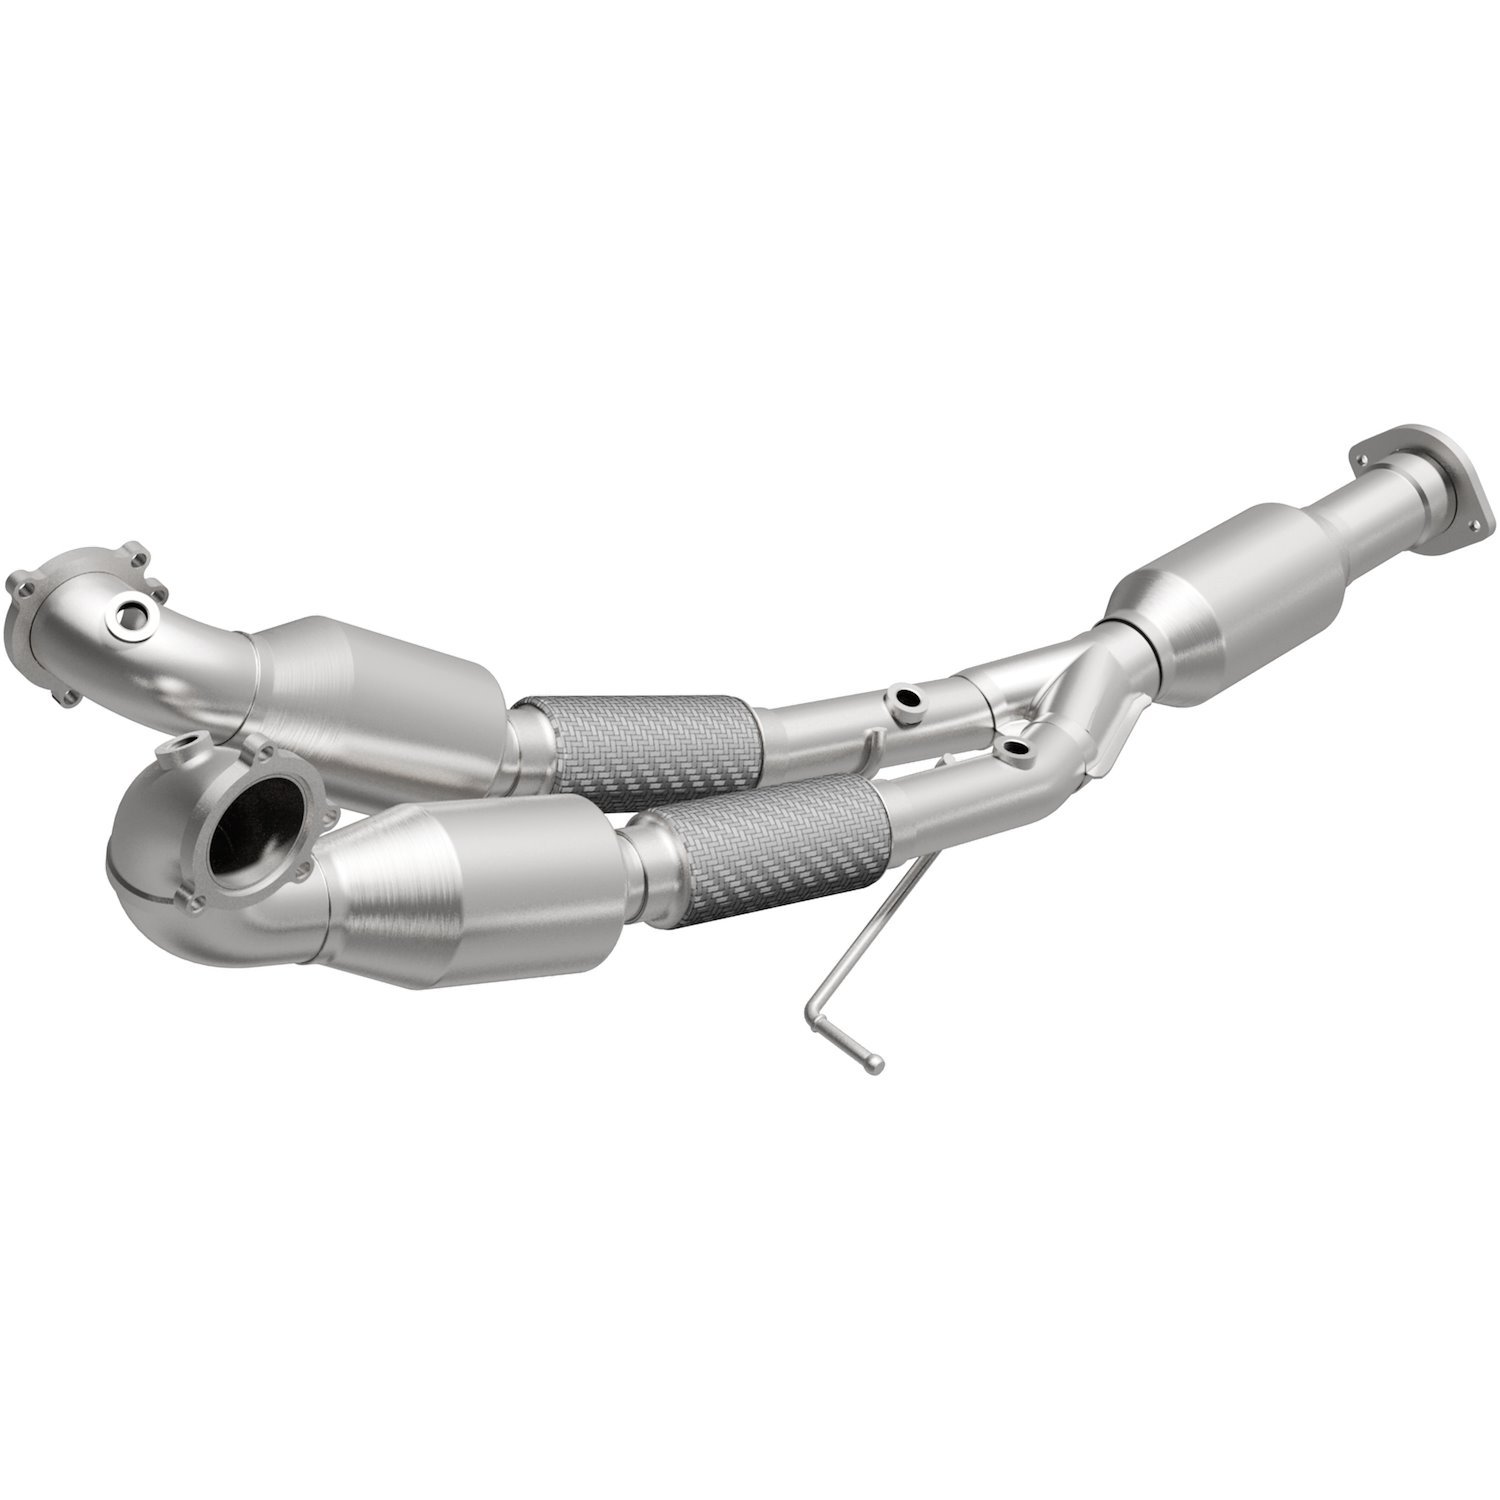 2002-2005 Volvo S80 OEM Grade Federal / EPA Compliant Direct-Fit Catalytic Converter